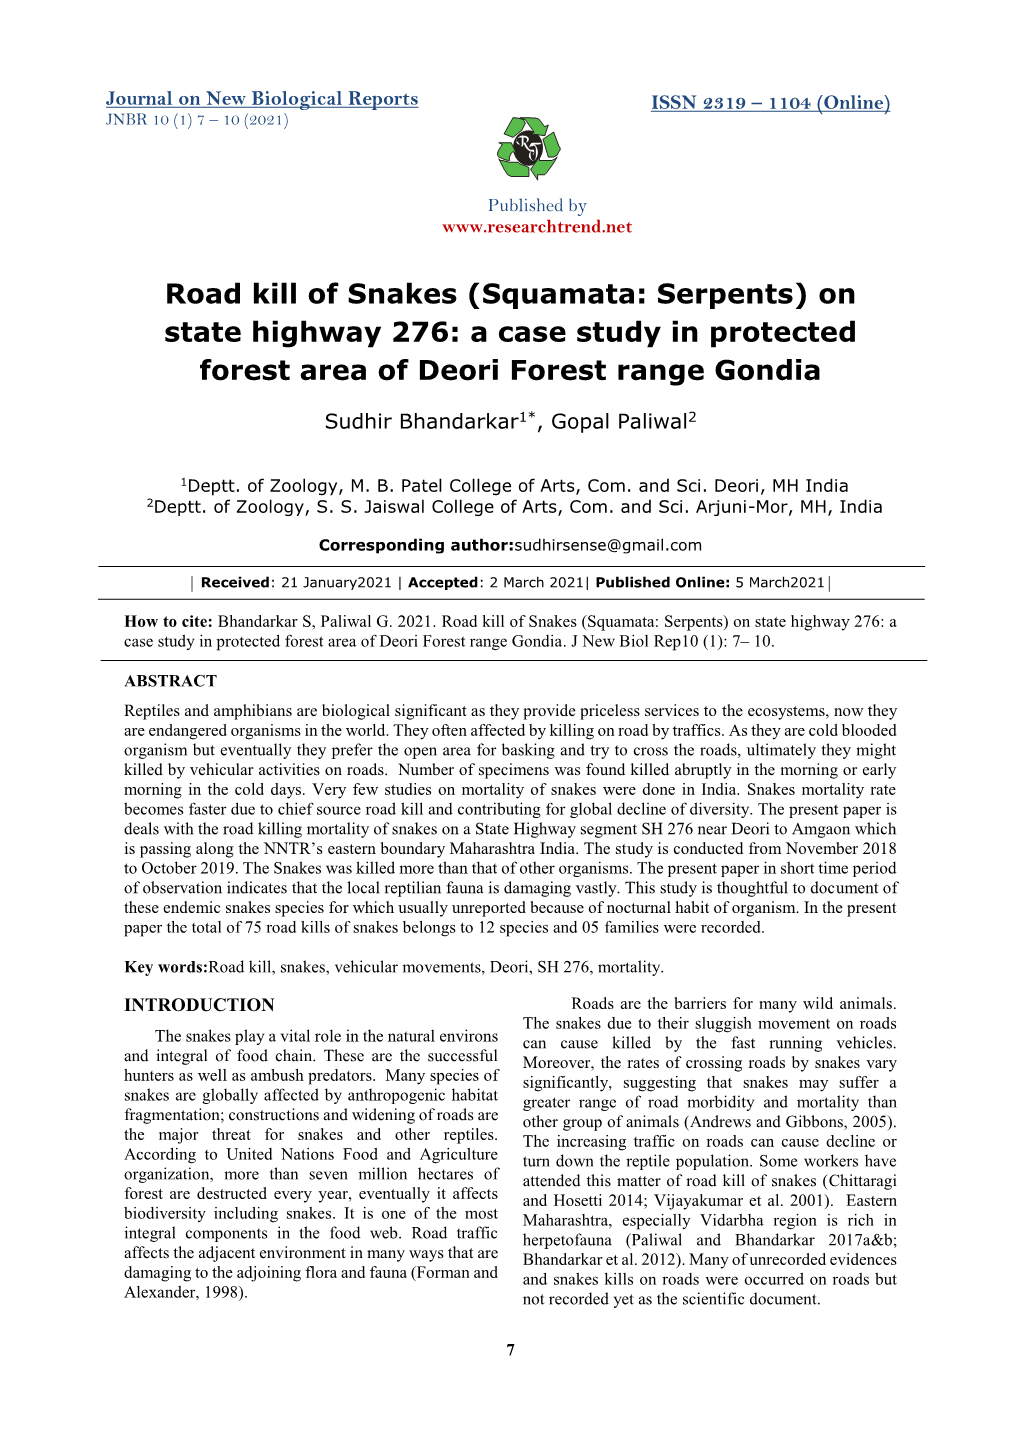 Road Kill of Snakes (Squamata: Serpents) on State Highway 276: a Case Study in Protected Forest Area of Deori Forest Range Gondia